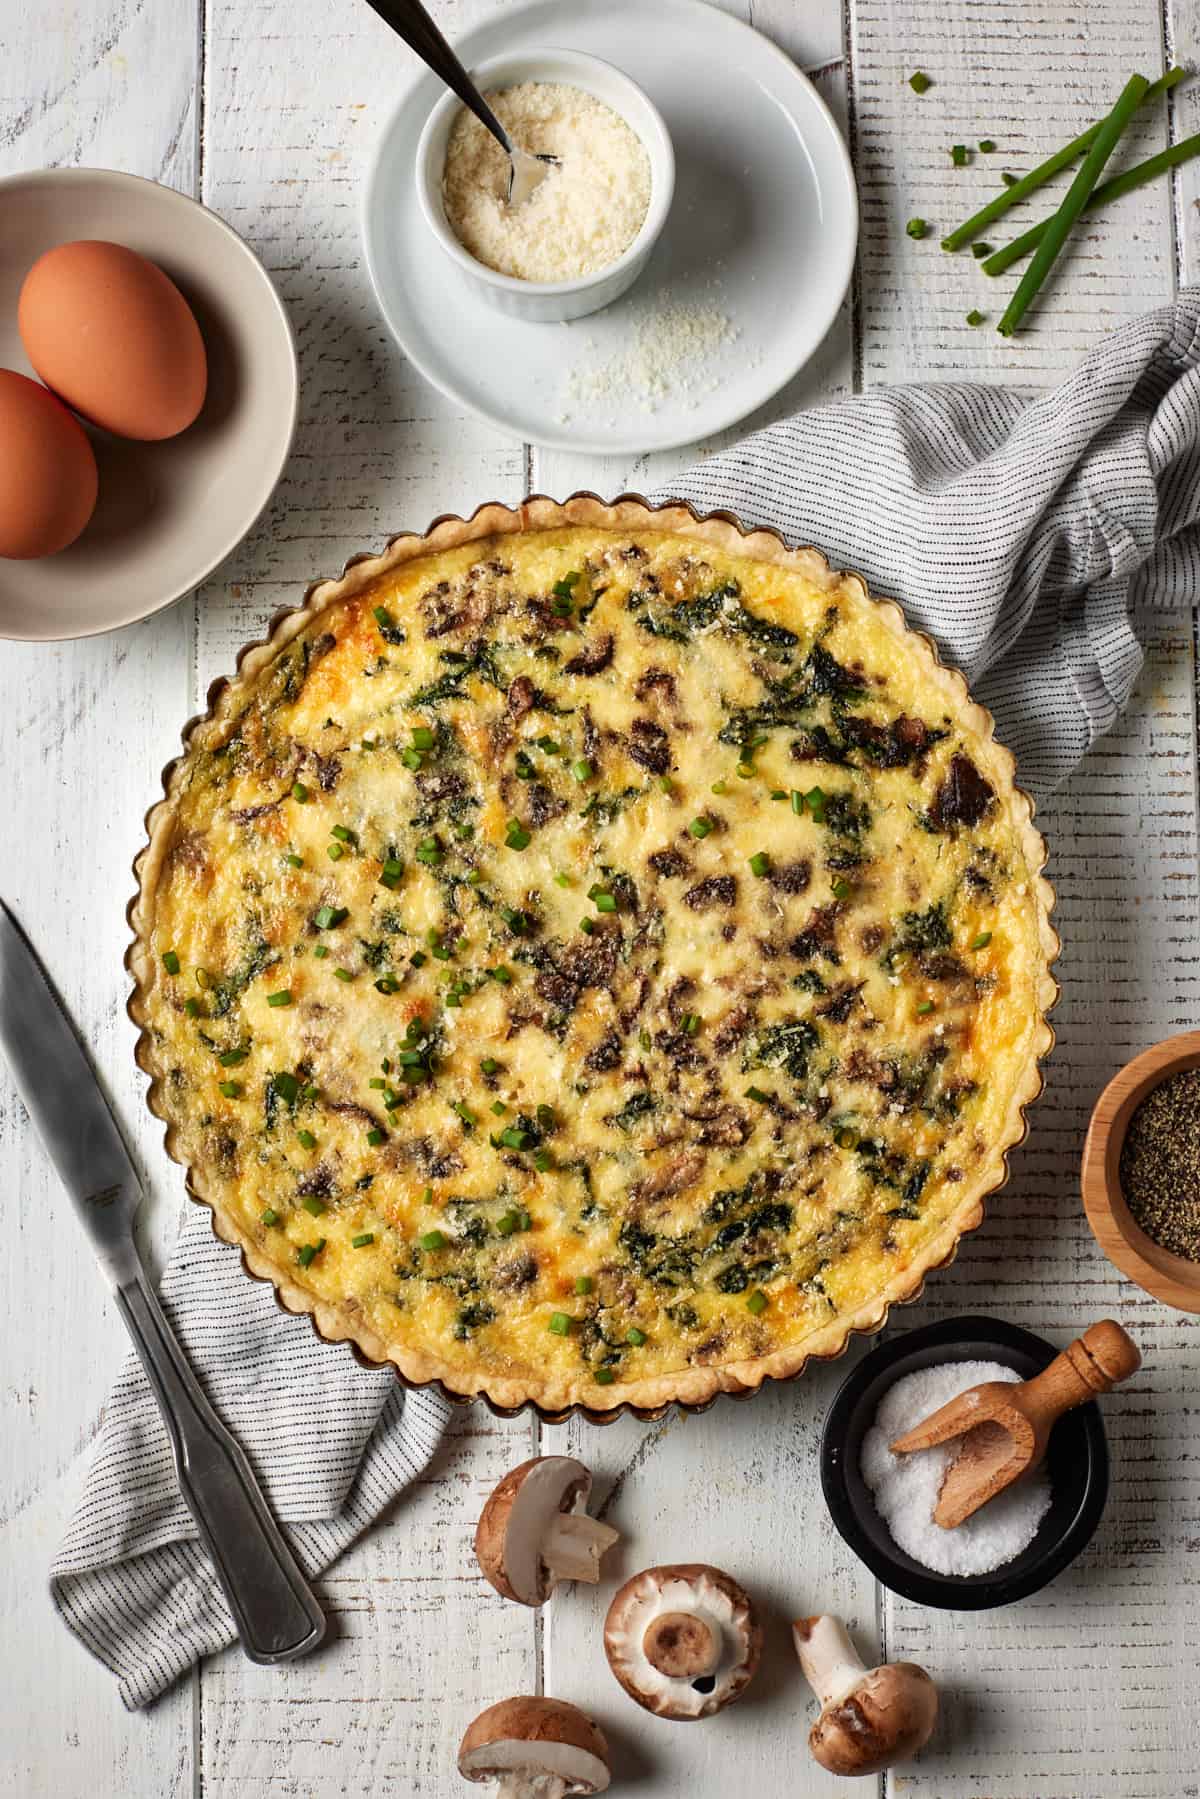 Baked quiche in pan with parmesan cheese and eggs.